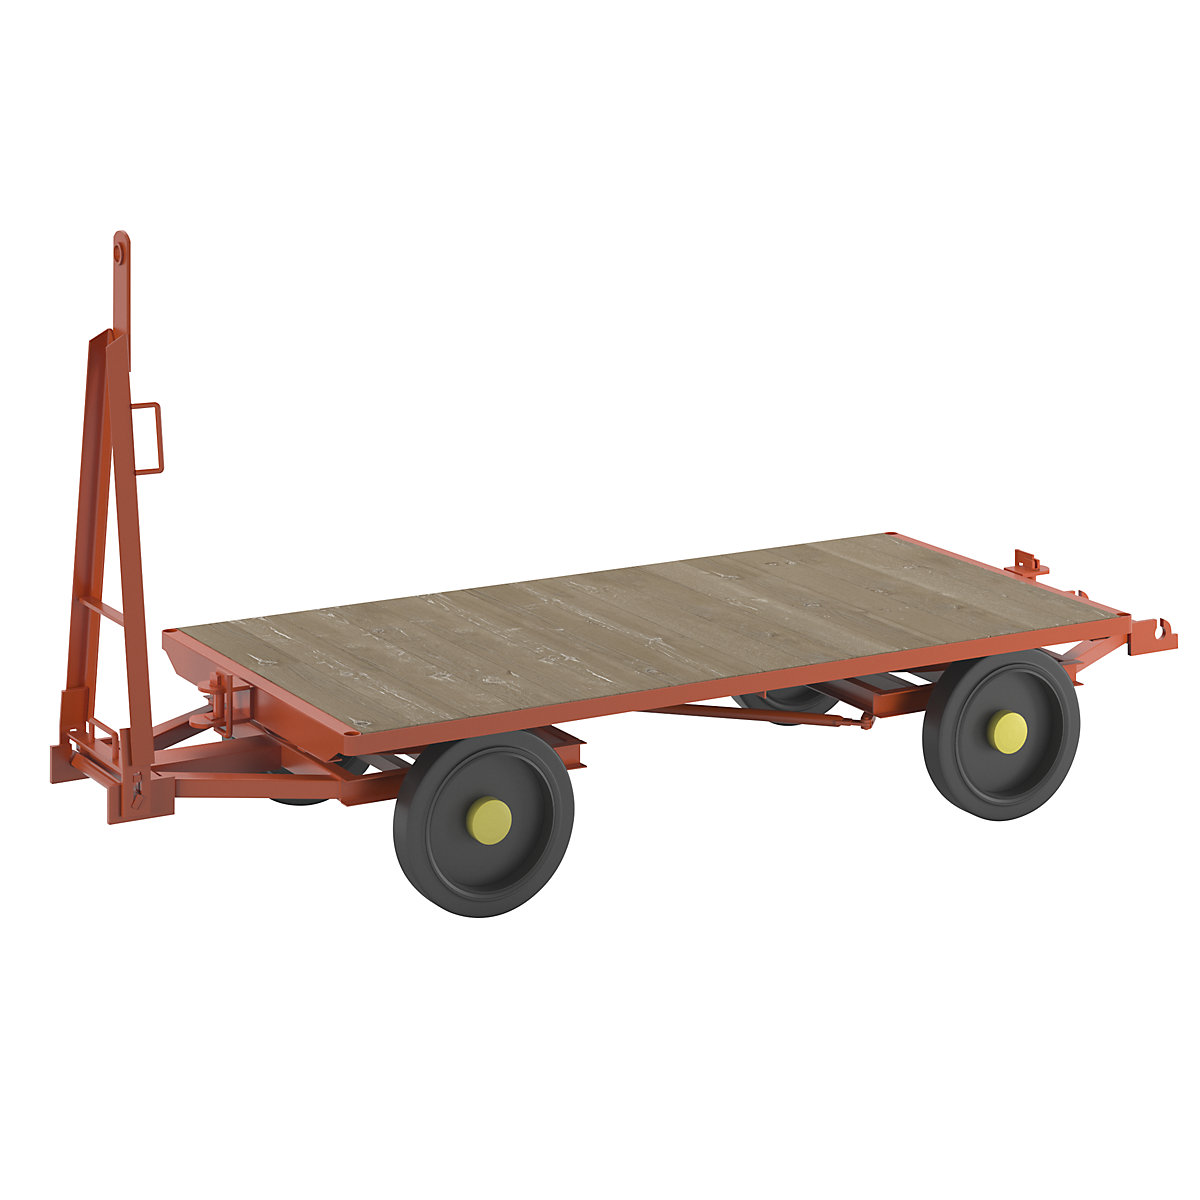 Trailer, 4-wheel double turntable steering, max. load 3 t, platform 2.0 x 1.0 m, solid rubber tyres-15